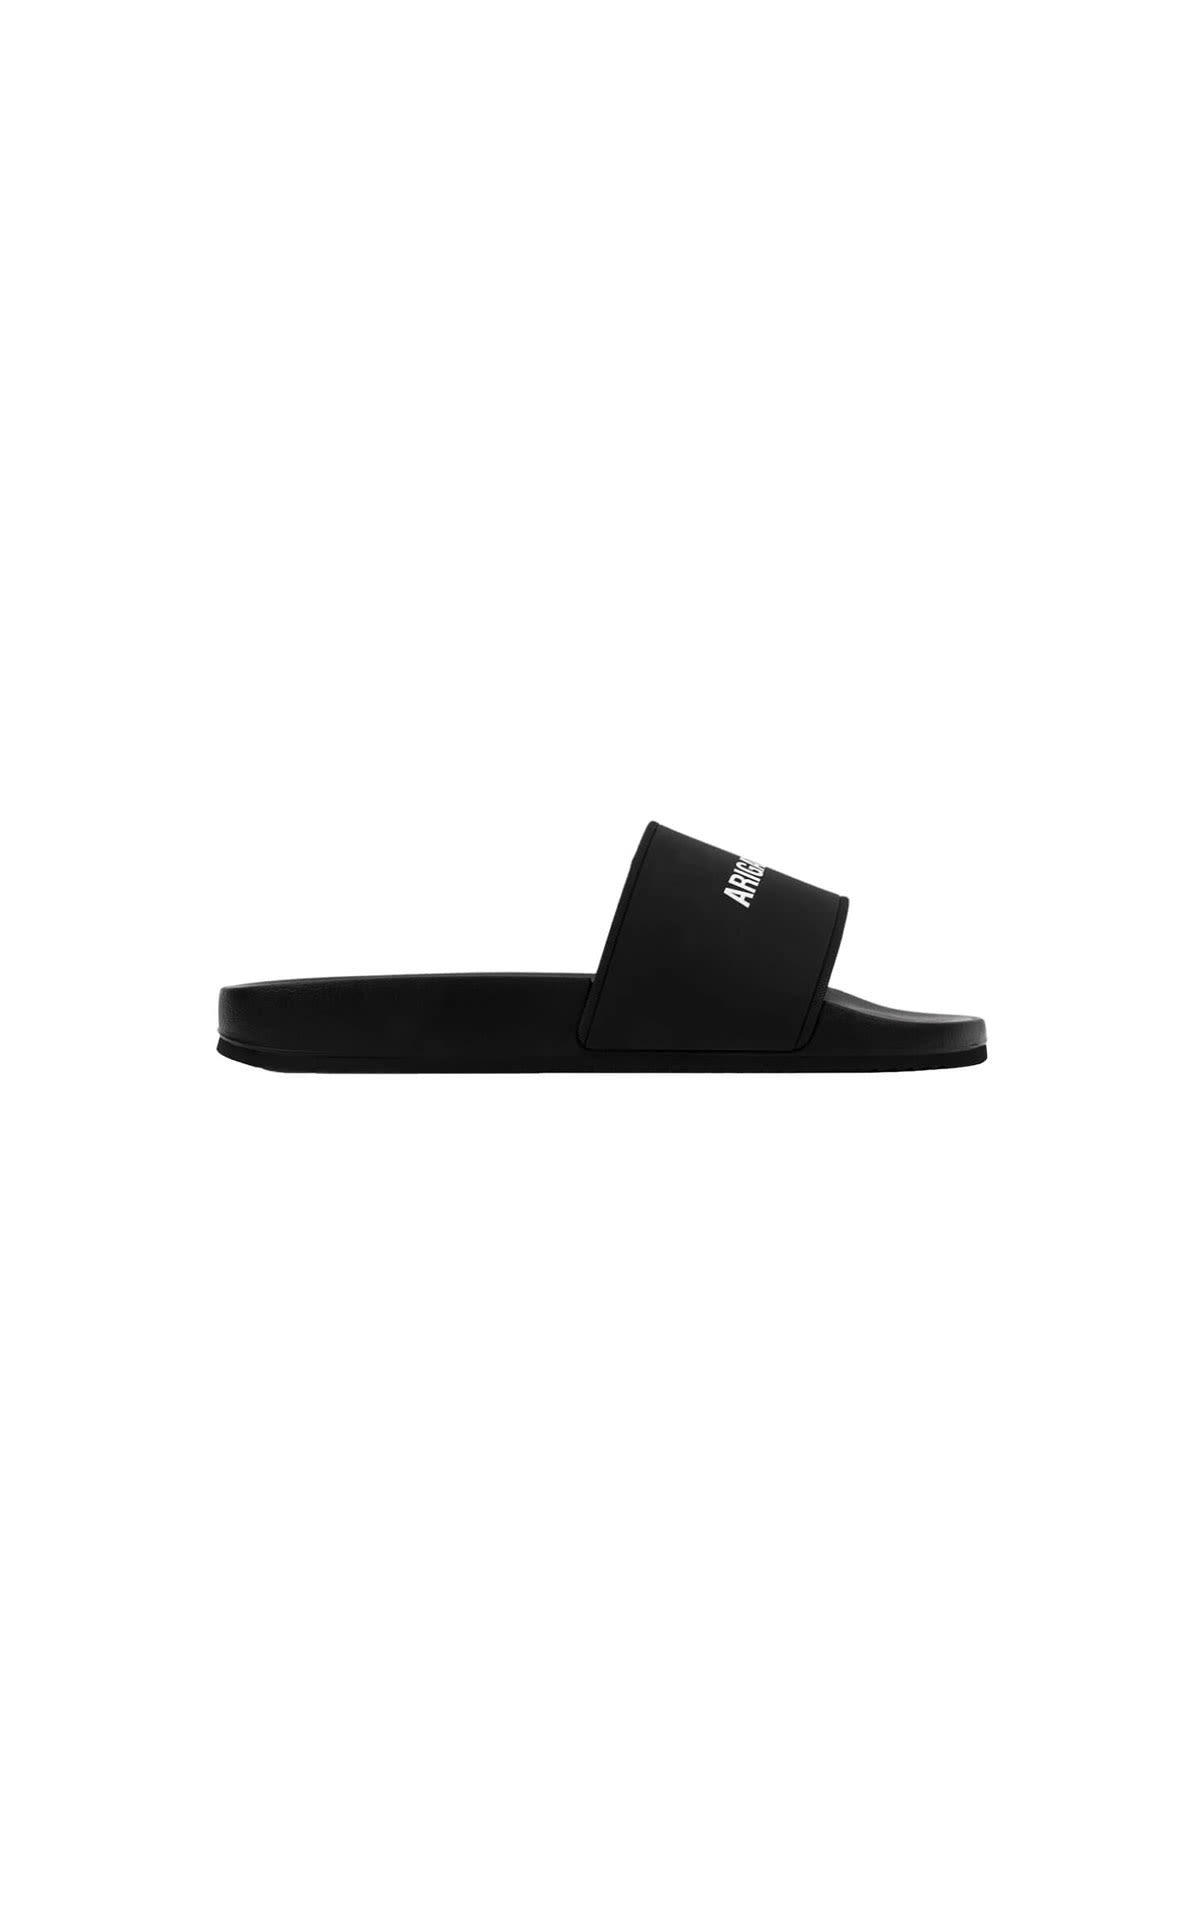 Axel Arigato Pool slide black from Bicester Village